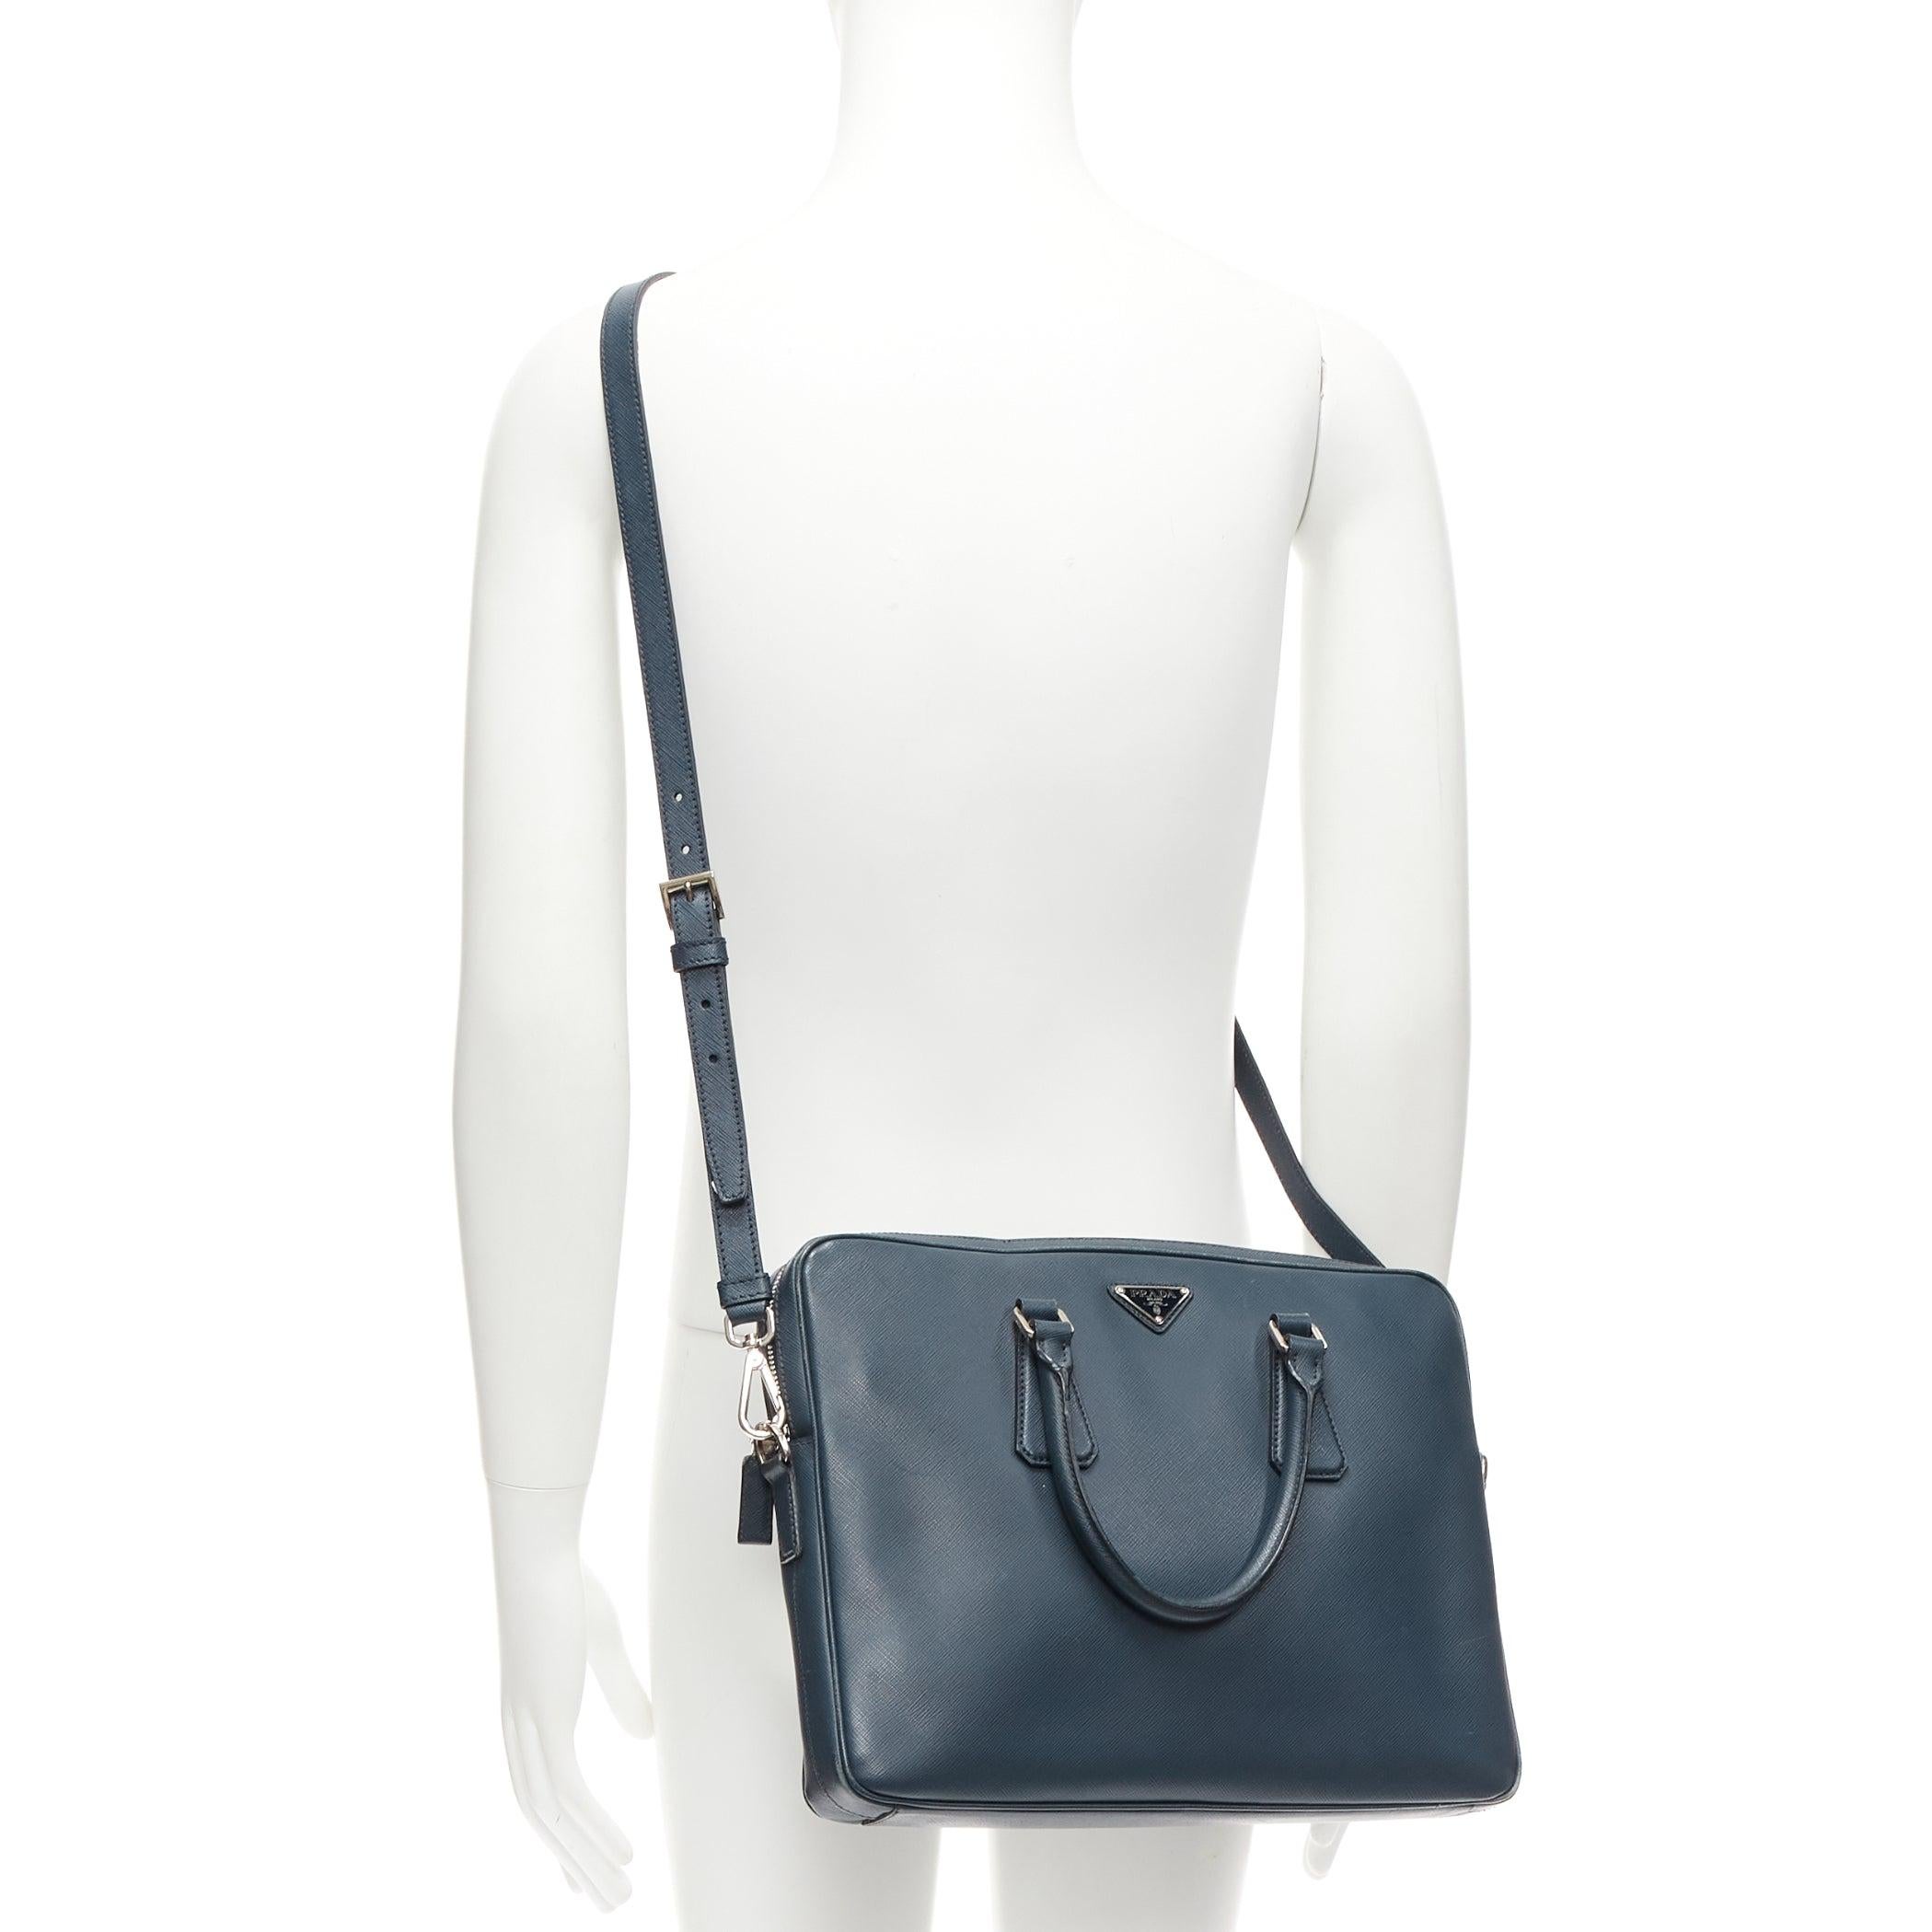 PRADA navy saffiano leather triangle logo plate crossbody top handle briefcase
Reference: TGAS/D00901
Brand: Prada
Designer: Miuccia Prada
Material: Leather
Color: Navy, Silver
Pattern: Solid
Closure: Zip
Lining: Black Fabric
Extra Details: